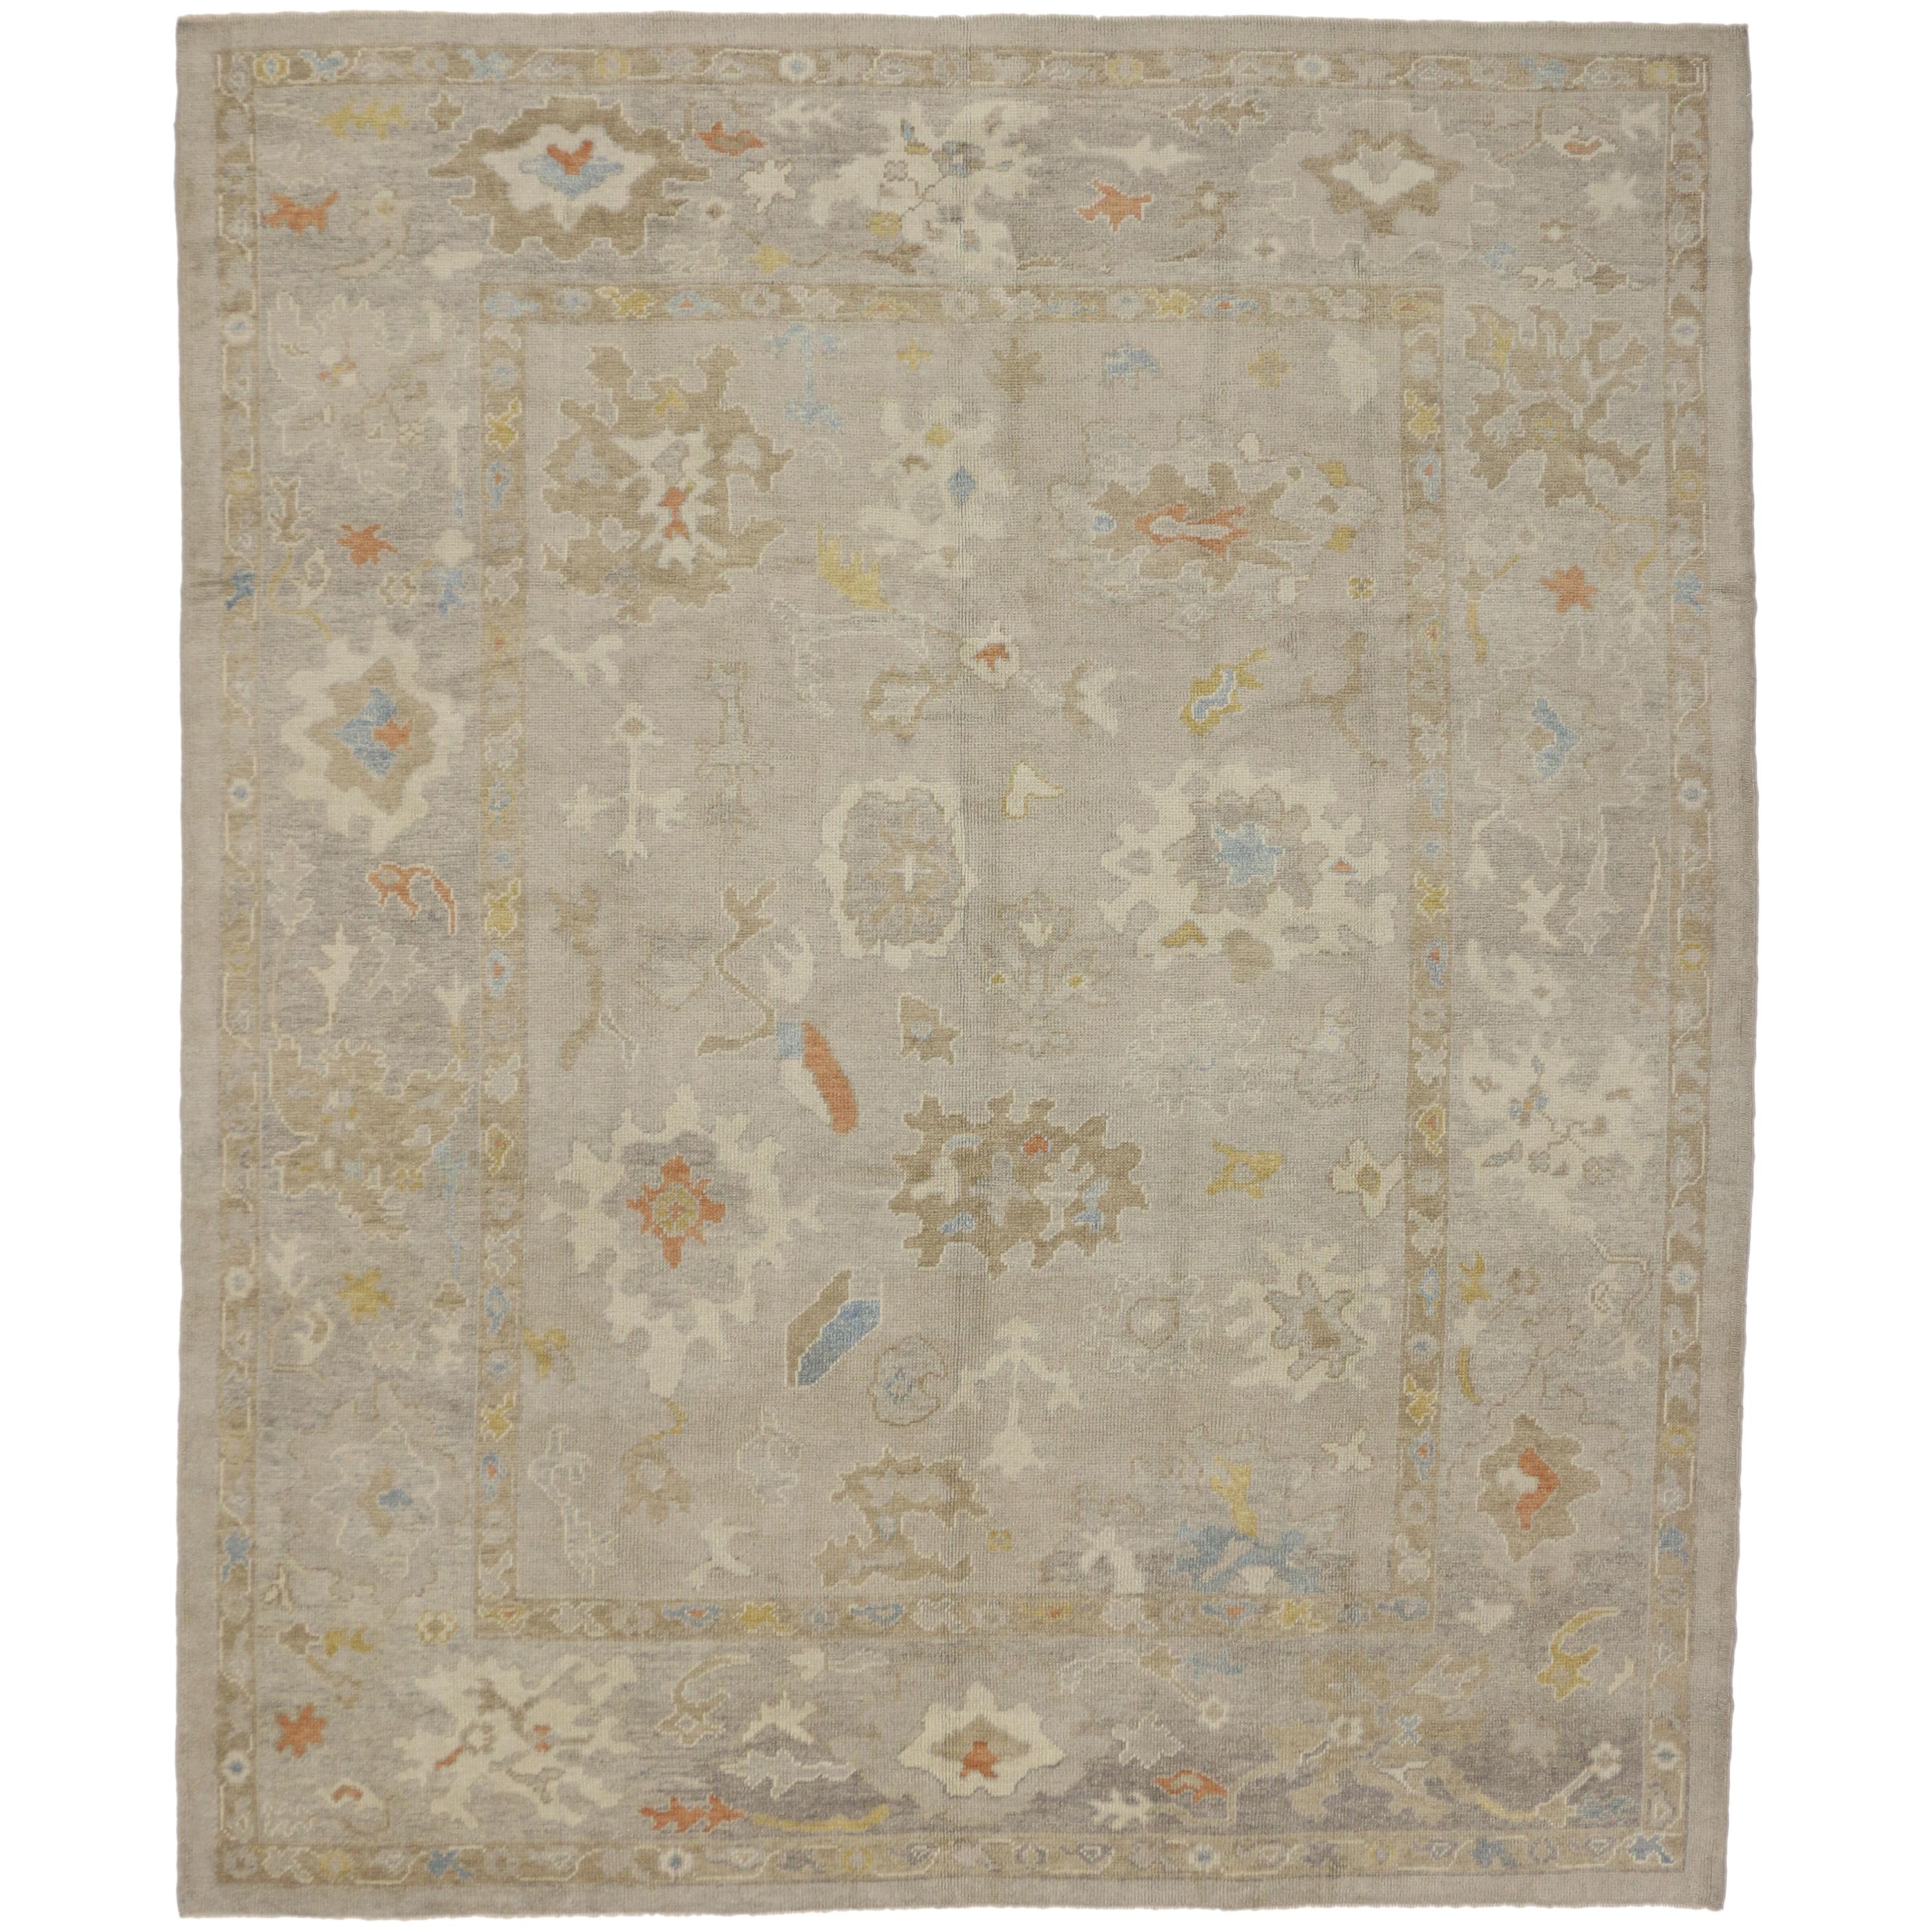 New Turkish Oushak Area Rug with Light, Neutral Colors For Sale